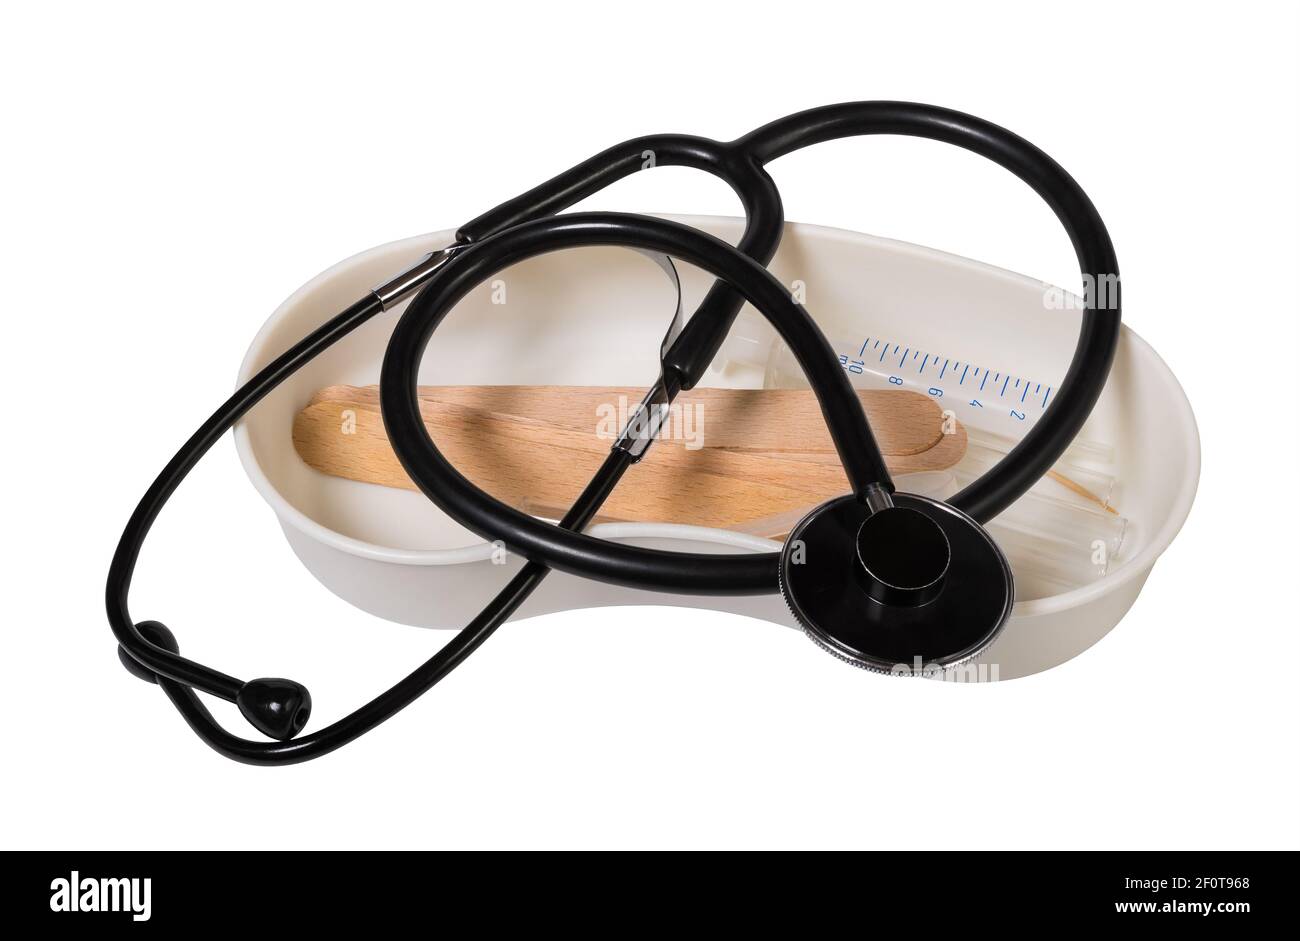 Black acoustic stethoscope and medical equipment. Diagnostic tool for heartbeat exam on plastic dish with syringe and wooden tongue depressors. Health. Stock Photo